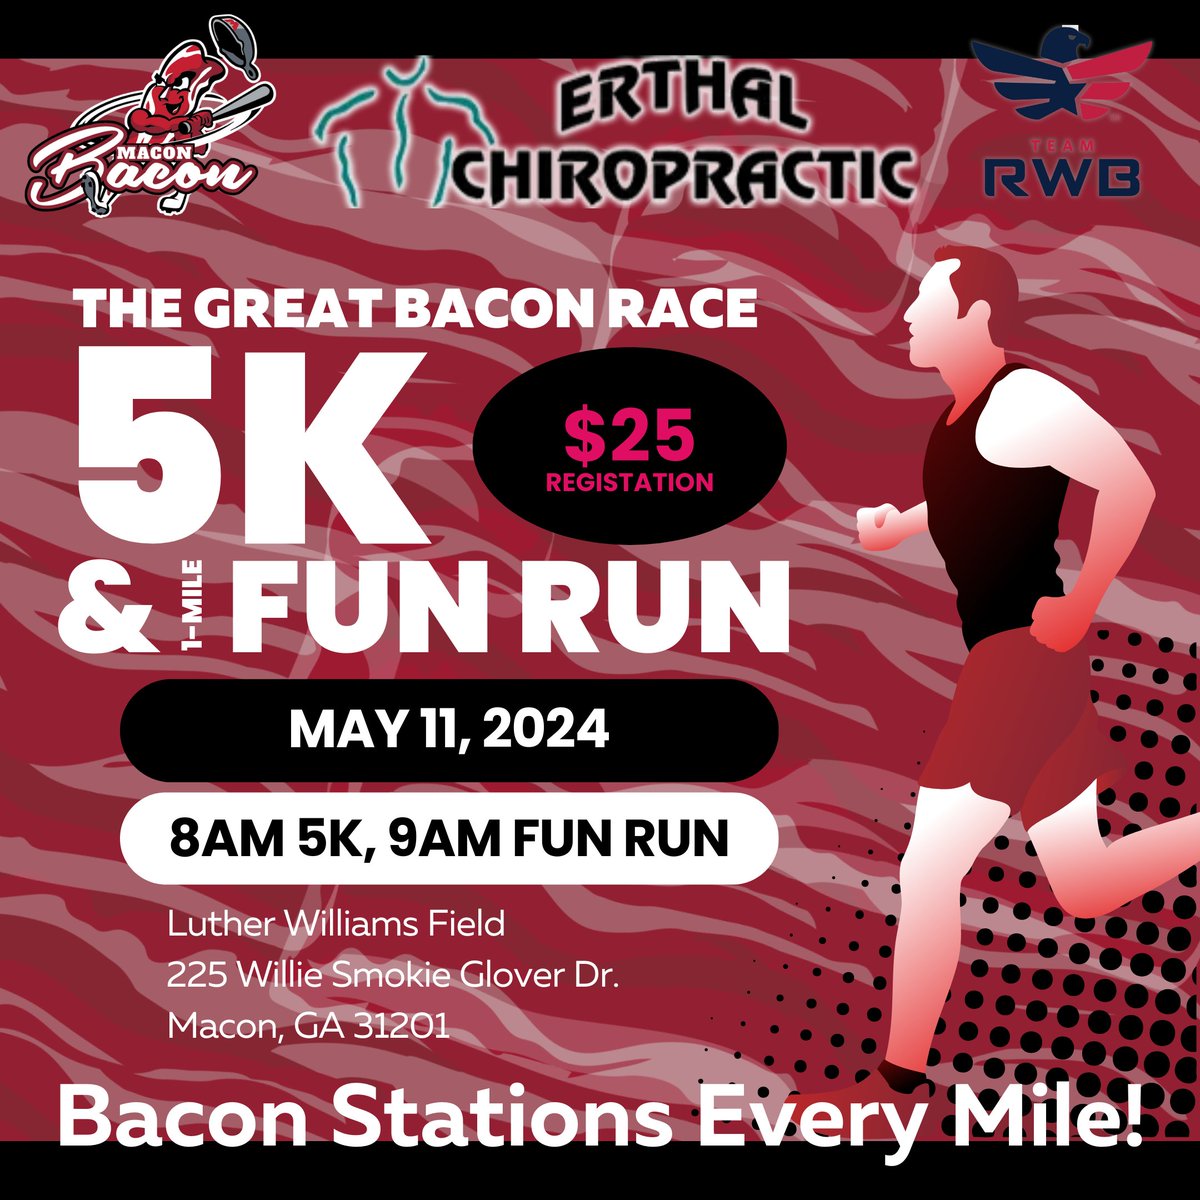 The Great Bacon Race is back! We are again partnering with Erthal Chiropractic to benefit a great cause, Team RWB. Join us at 8am on May 11th at Luther Williams Field for the most fun race of the year. Register now: runsignup.com/Race/GA/Macon/…